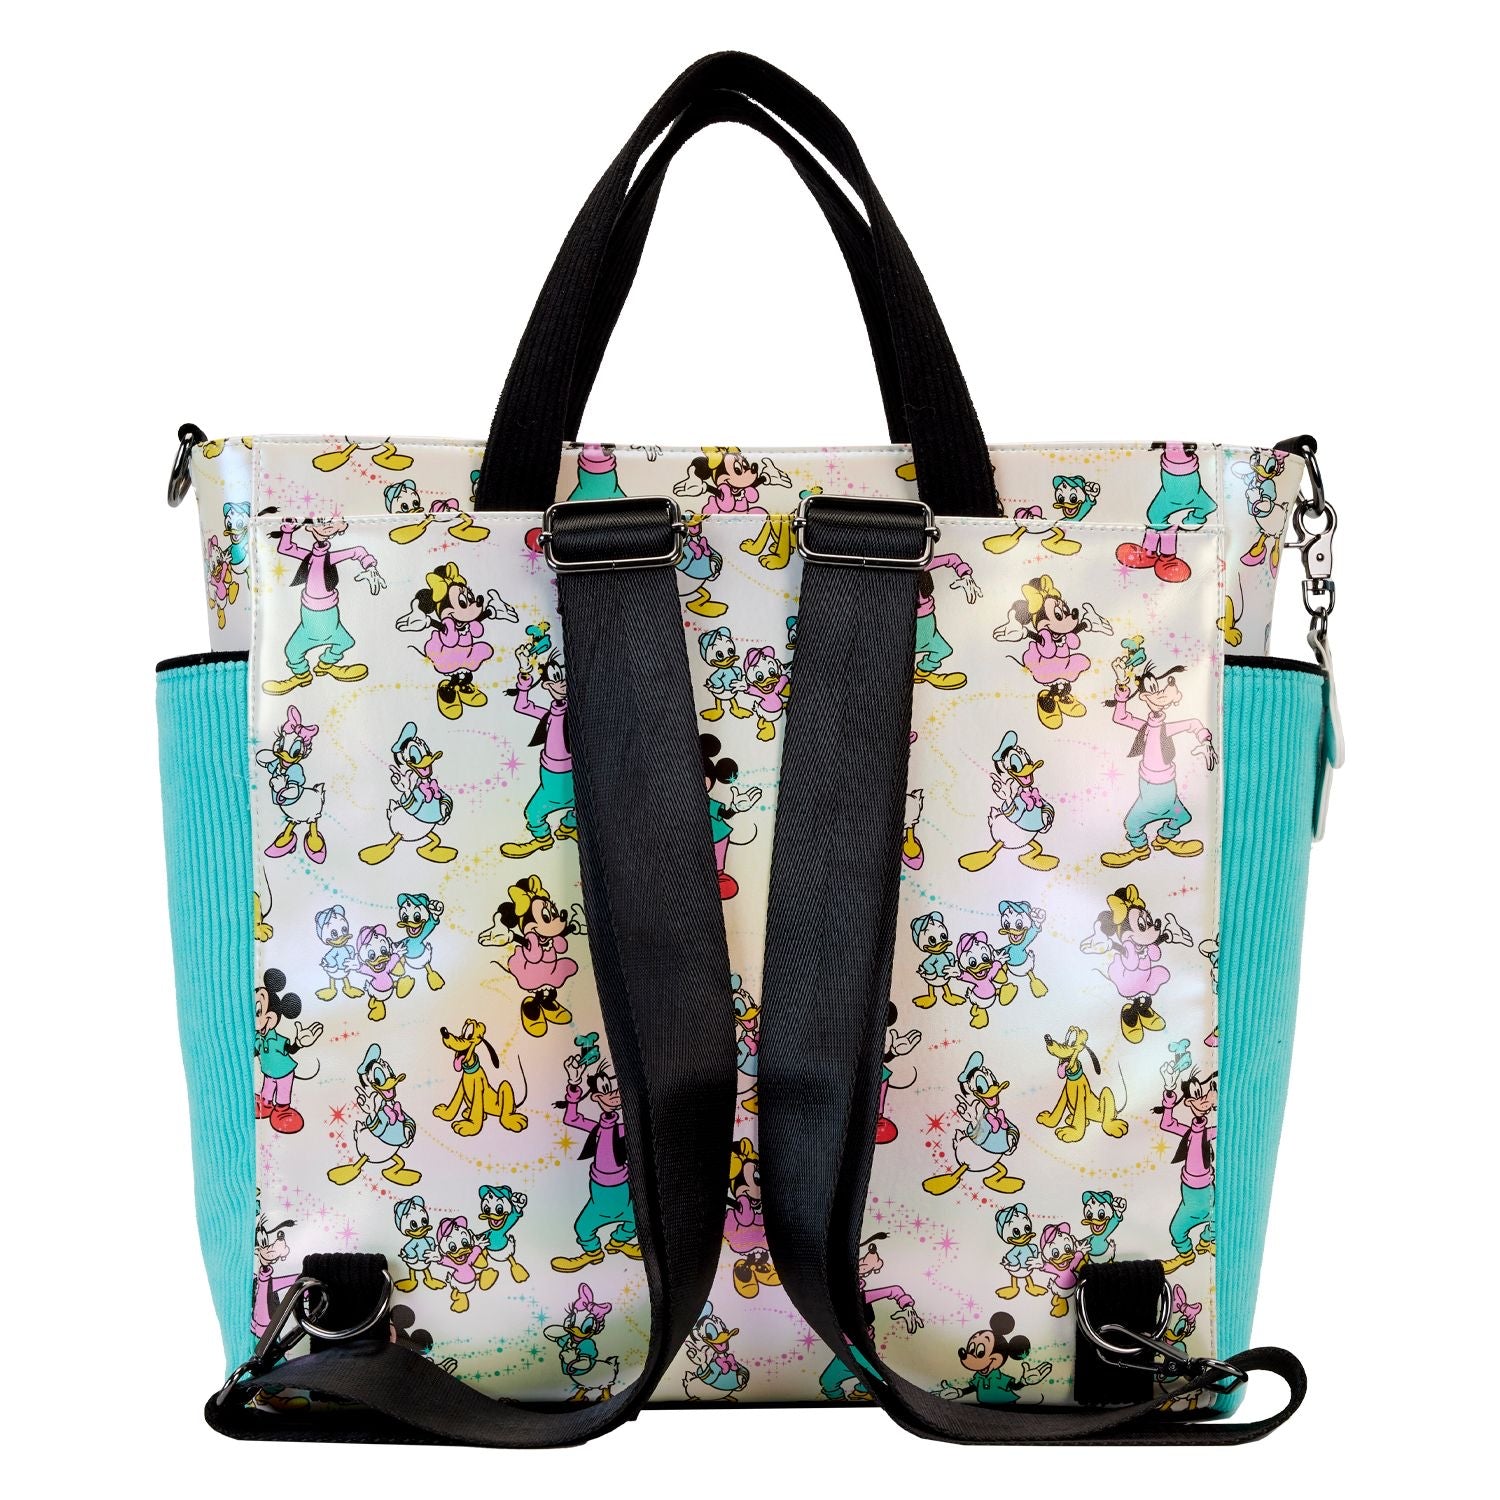 Loungefly DISNEY D100 CLASSIC AOP CONVERTIBLE TOTE BAG